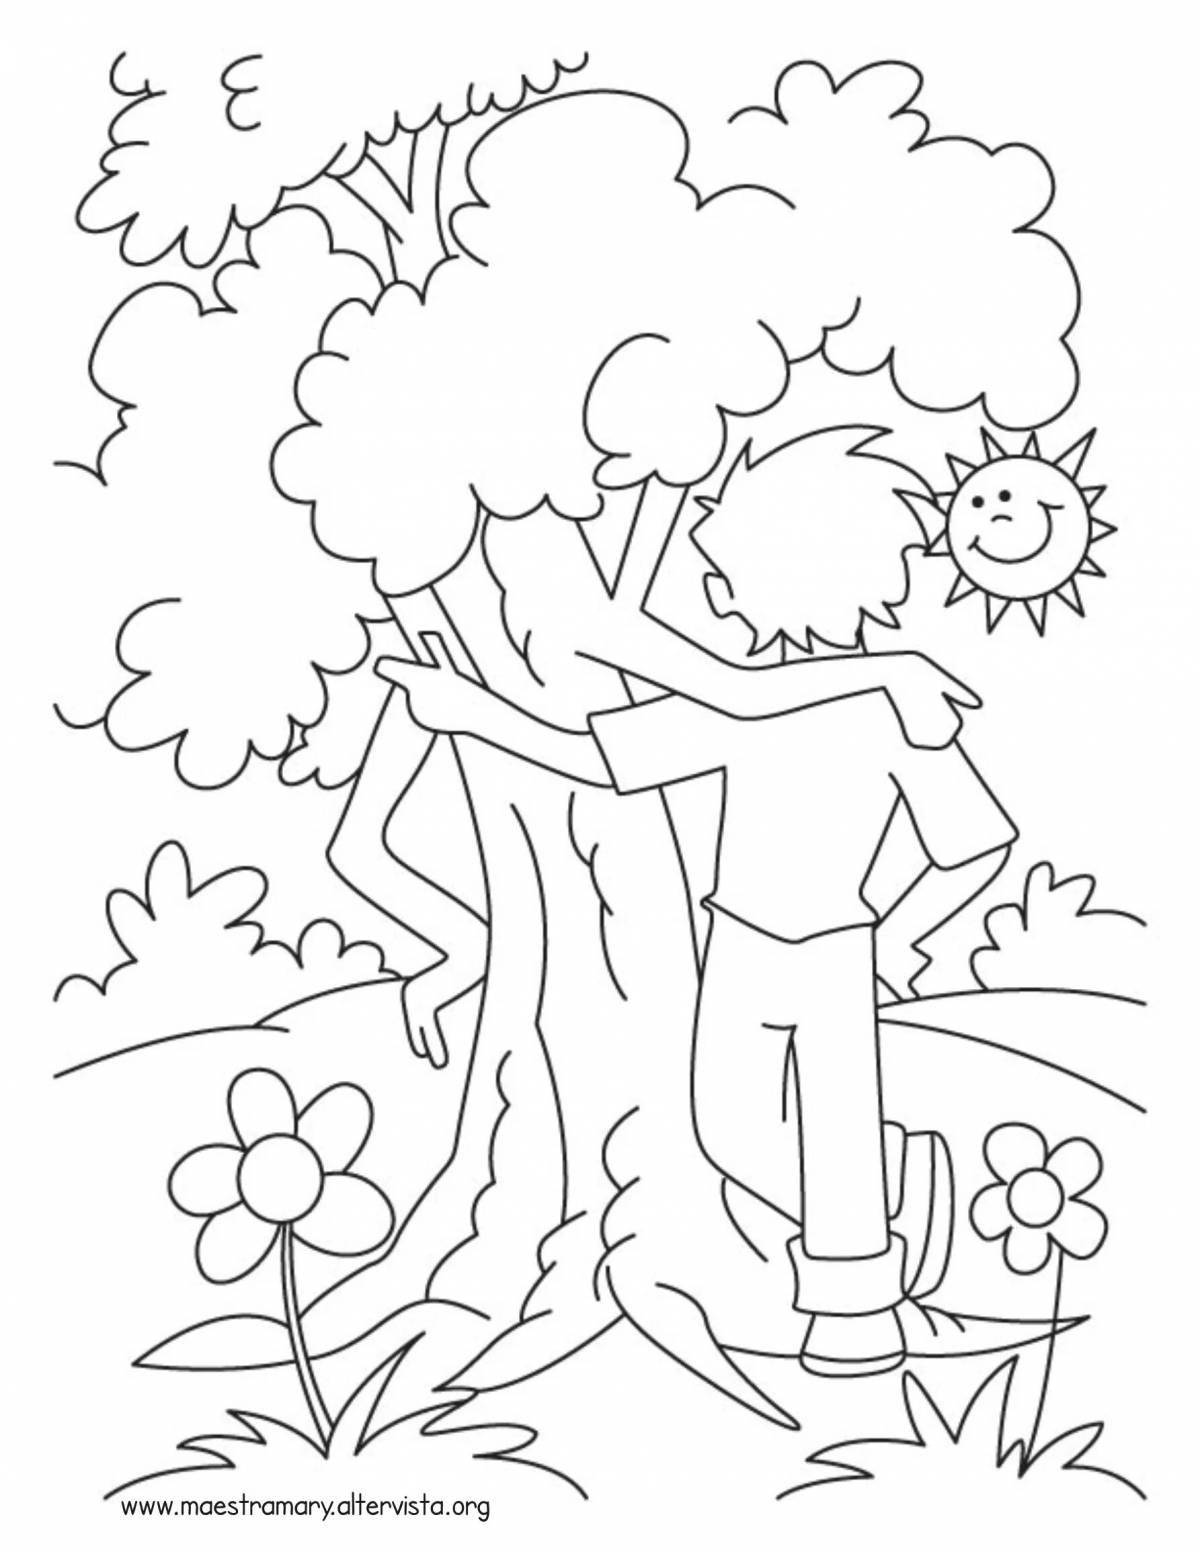 Coloring page enchanting care for nature